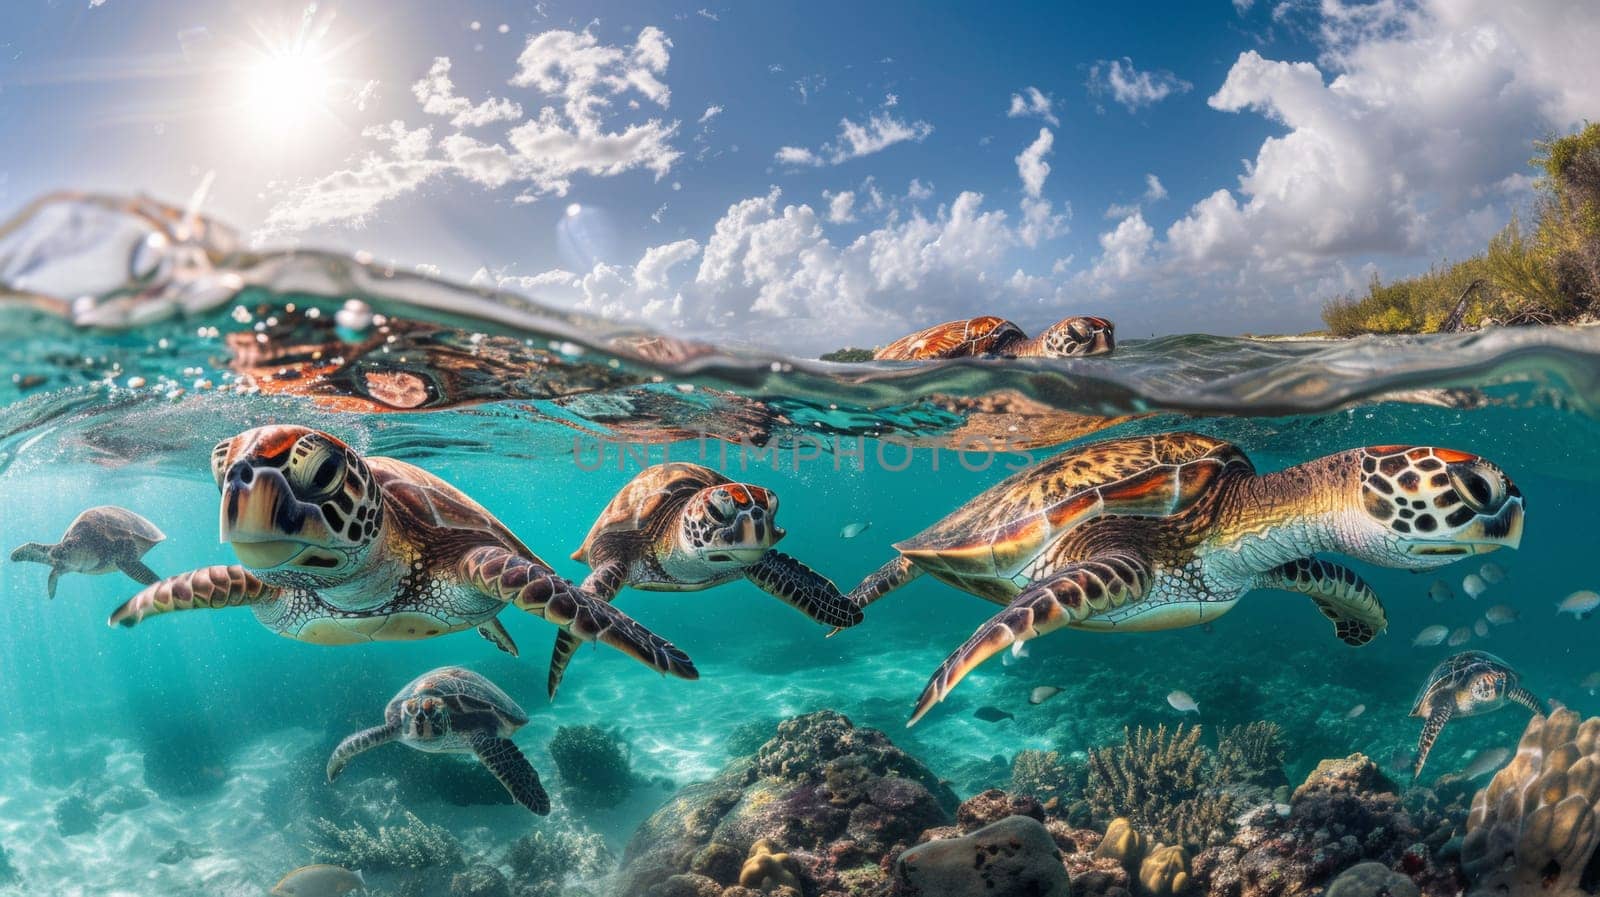 A group of turtles swimming in the ocean near coral reefs